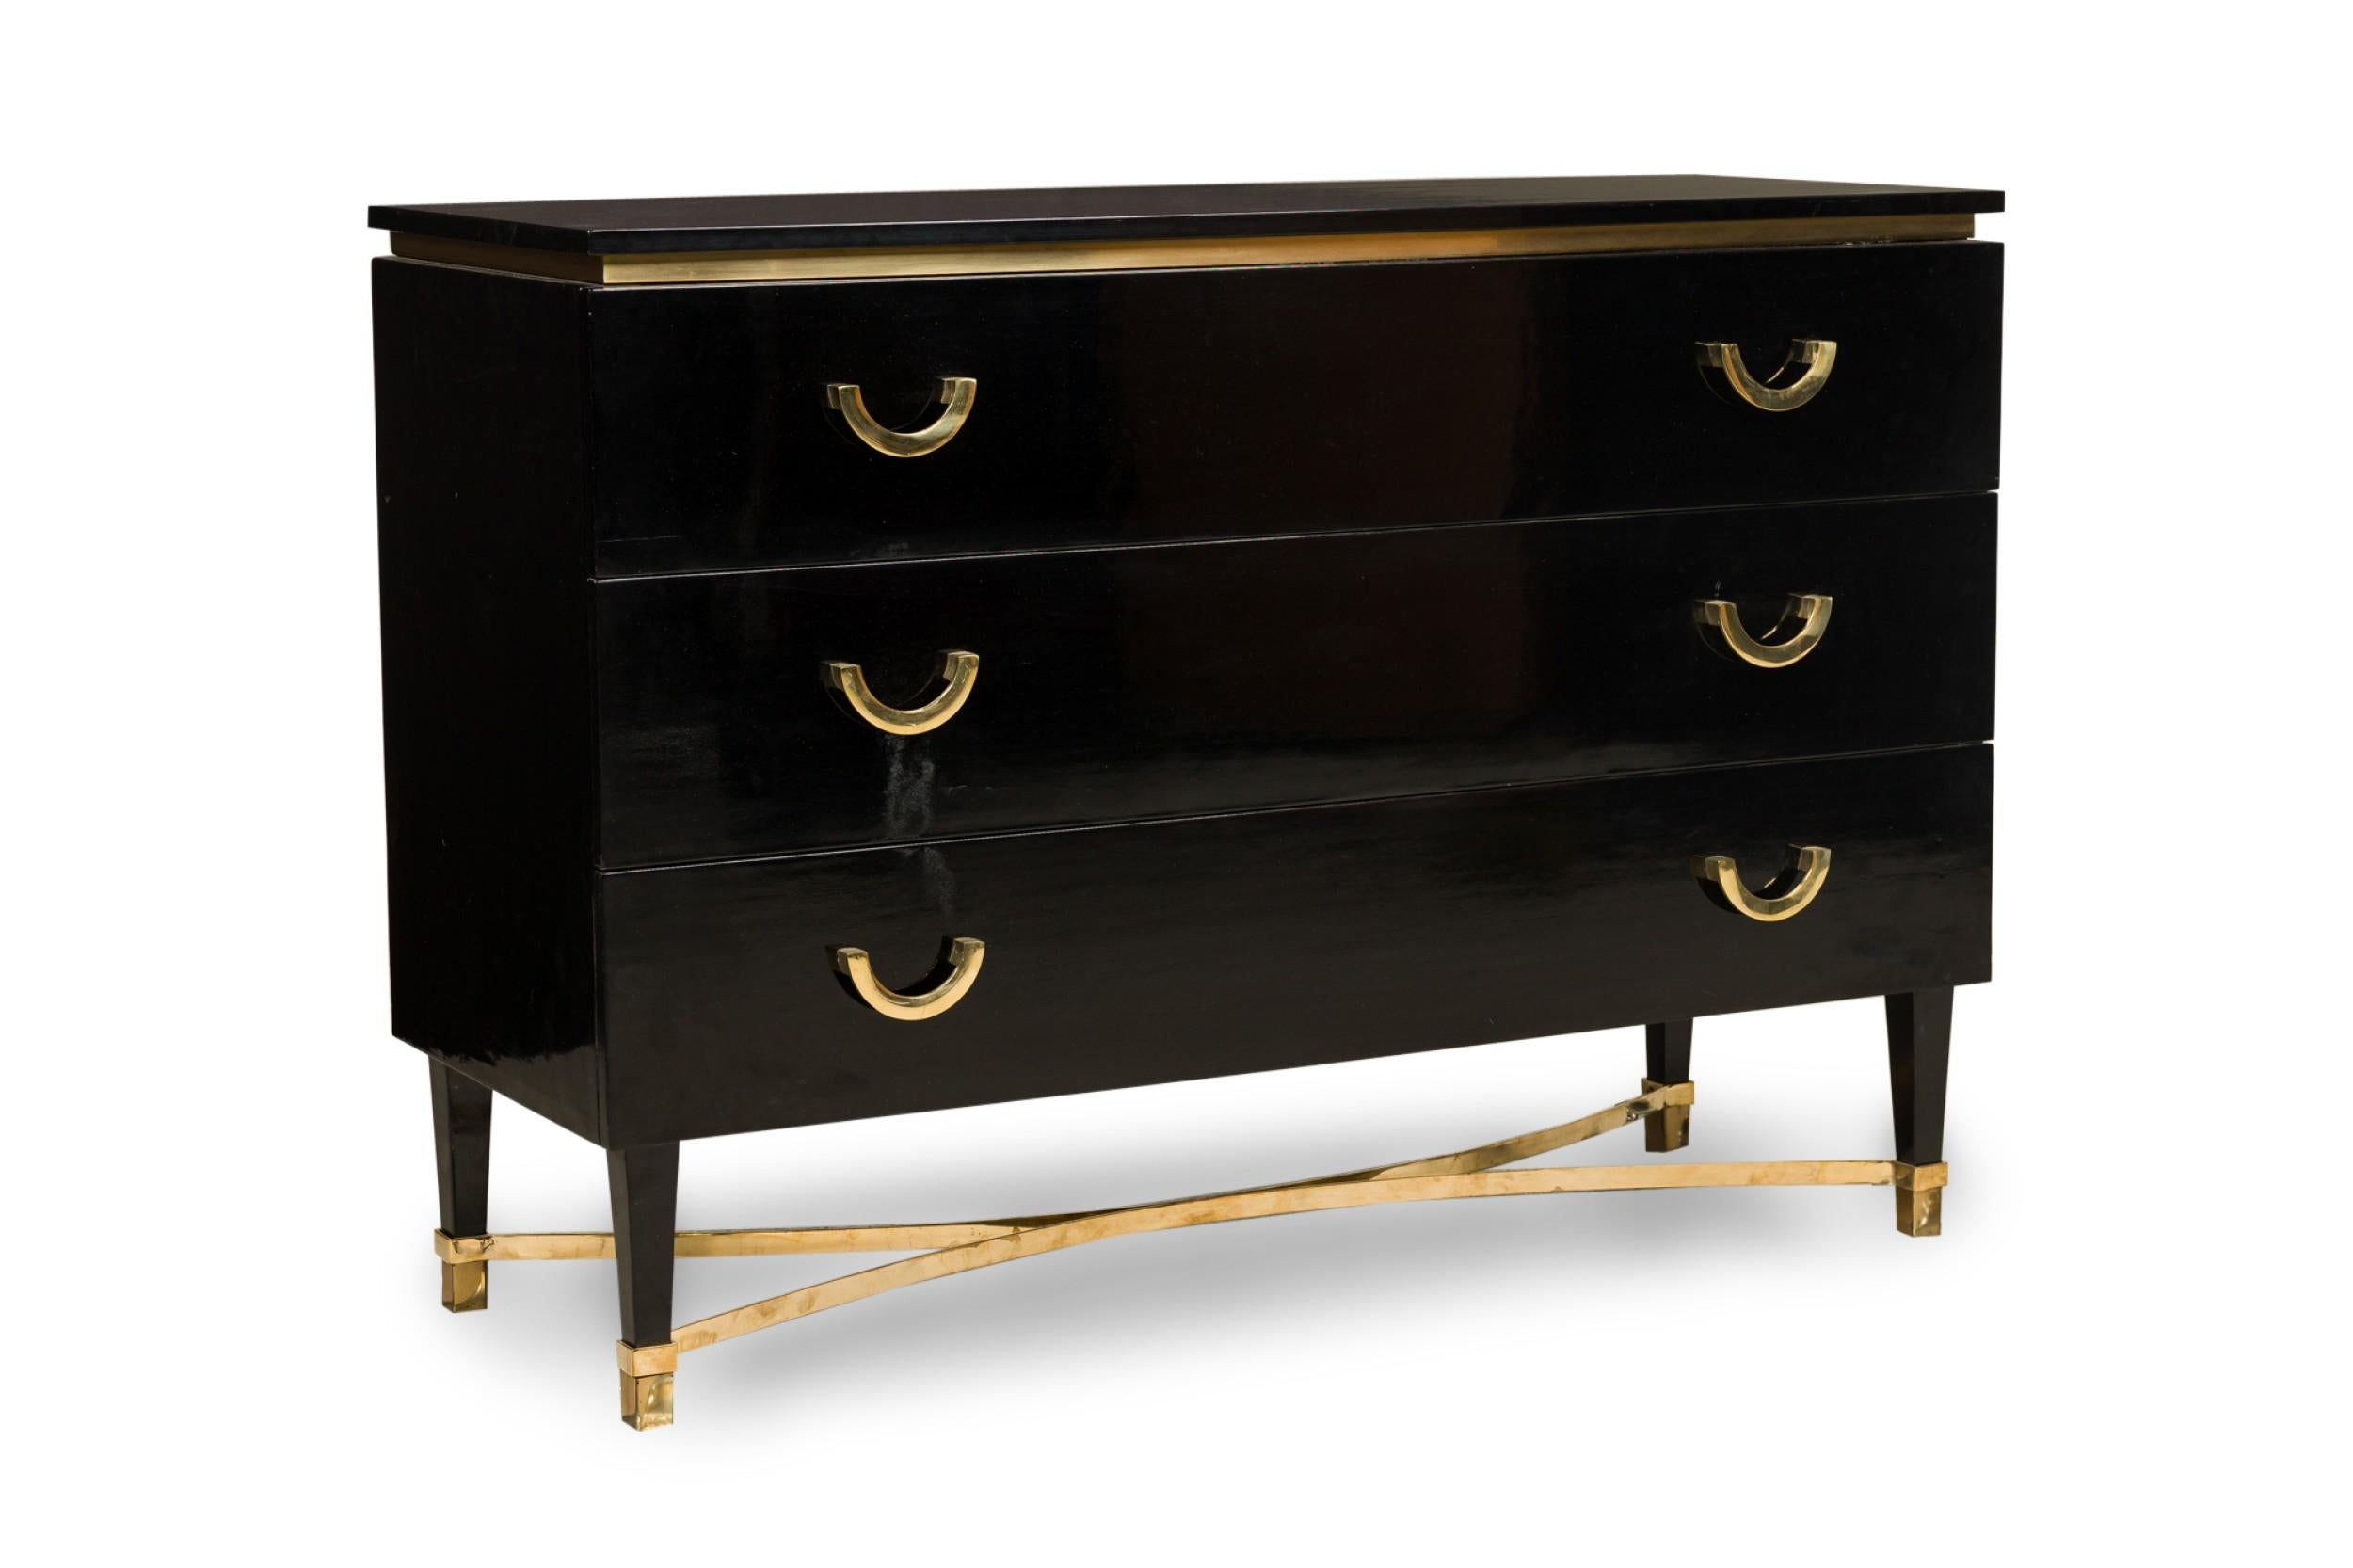 PAIR of Mid-Century Continental black lacquered rectangular wood dressers featuring a waisted top with bronze banding, 3 pullout drawers with 2 columns of bronze demilune pulls, resting on 4 tapered legs with bronze sabots, anchored by a concave